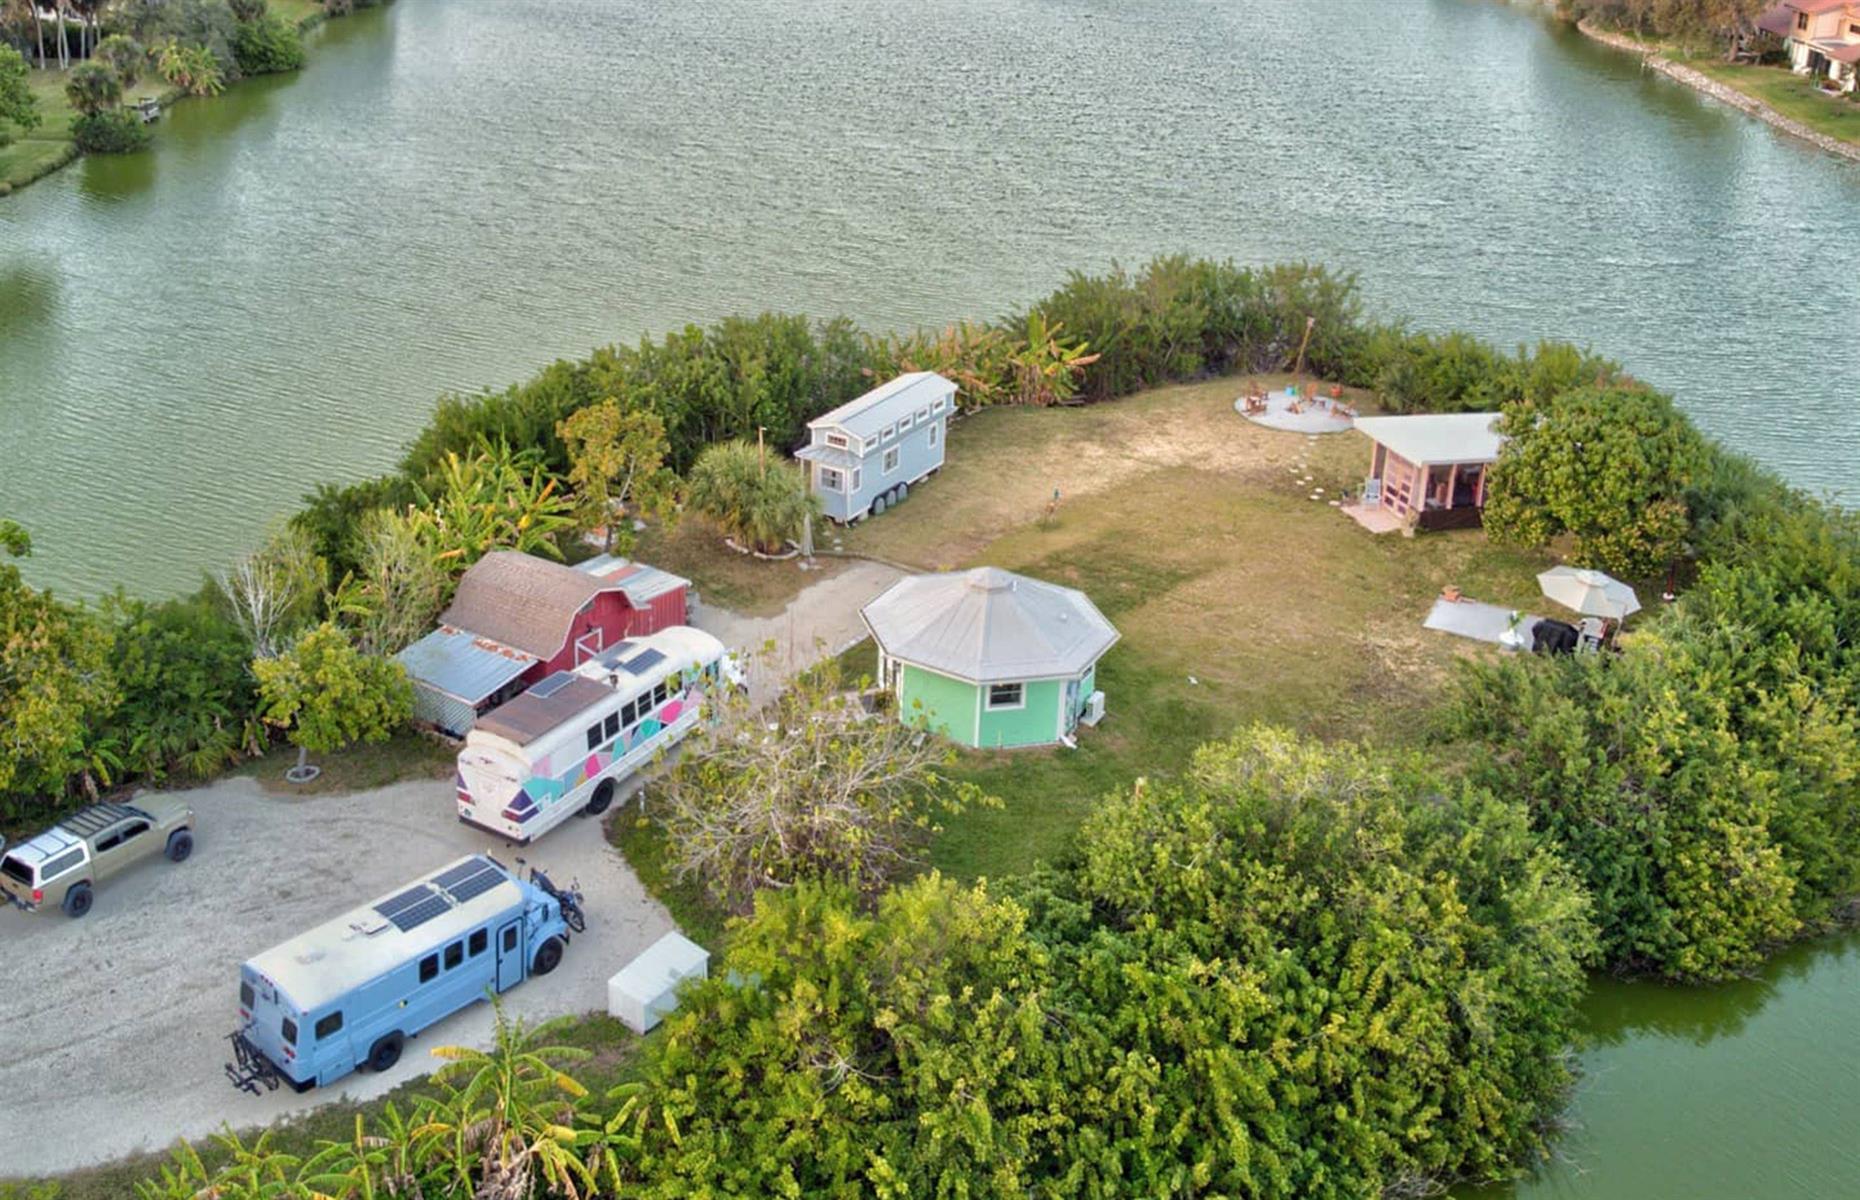 <p>For anyone looking to live out their own paradise island dream, Tim and Sam have decided to open up their special corner of the world to the public. Both <a href="https://www.airbnb.co.uk/rooms/49124830">Tiffany the Tiny Home</a> and the <a href="https://www.airbnb.co.uk/rooms/33166918">octagonal tiny home</a> are now available to rent on Airbnb.</p>  <p>The pocket-sized homes share the island's beautiful backyard, as well as benefitting from access to a firepit, barbeque, free bikes, kayaks and beach gear, guaranteeing guests a fun-filled stay.</p>